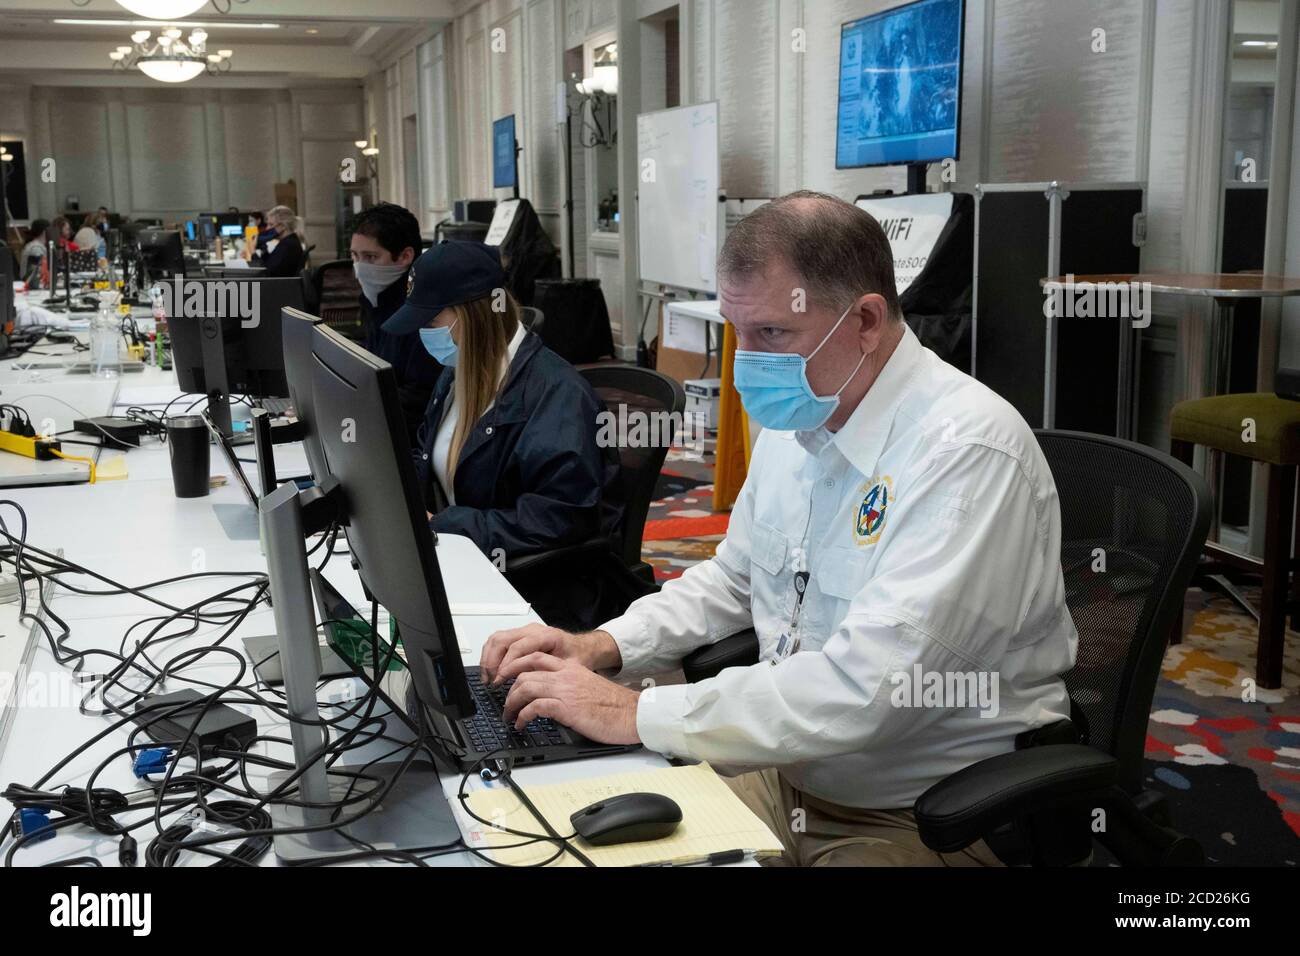 Austin, TX USA August 25, 2020: State employees wearing face mas work at the Texas Emergency Operations Center during preparations for Hurricane Laura, scheduled to make landfall in coastal east Texas and southwest Louisiana on Thursday. Credit: Bob Daemmrich/Alamy Live News Stock Photo